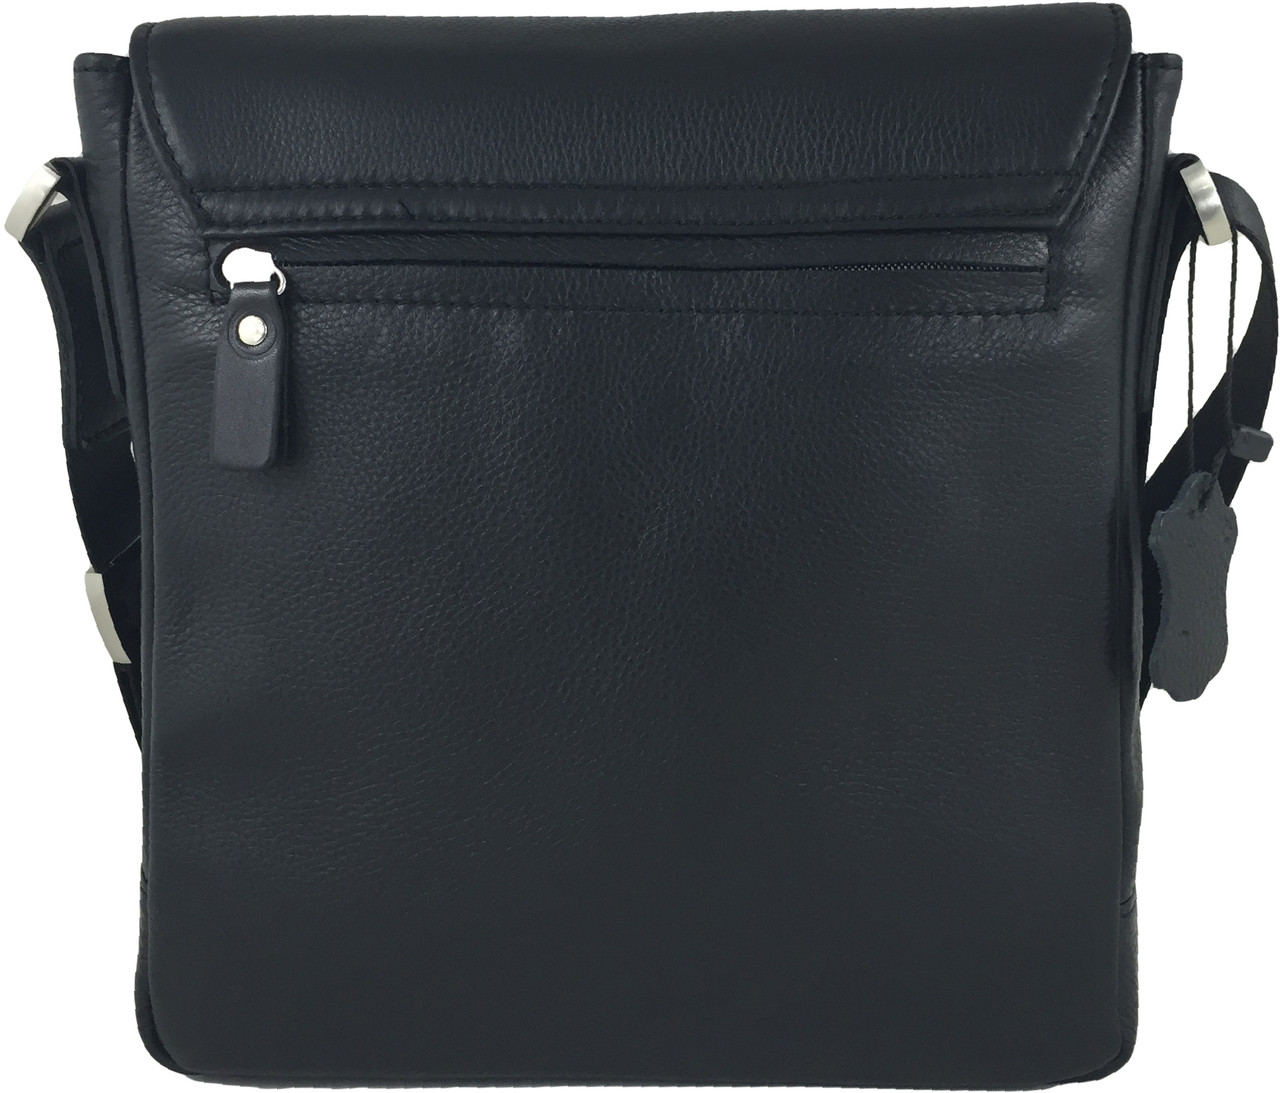 Black Leather Crossbody Bag Small Flap Messenger Bag Quality Genuine L –  Travell Well